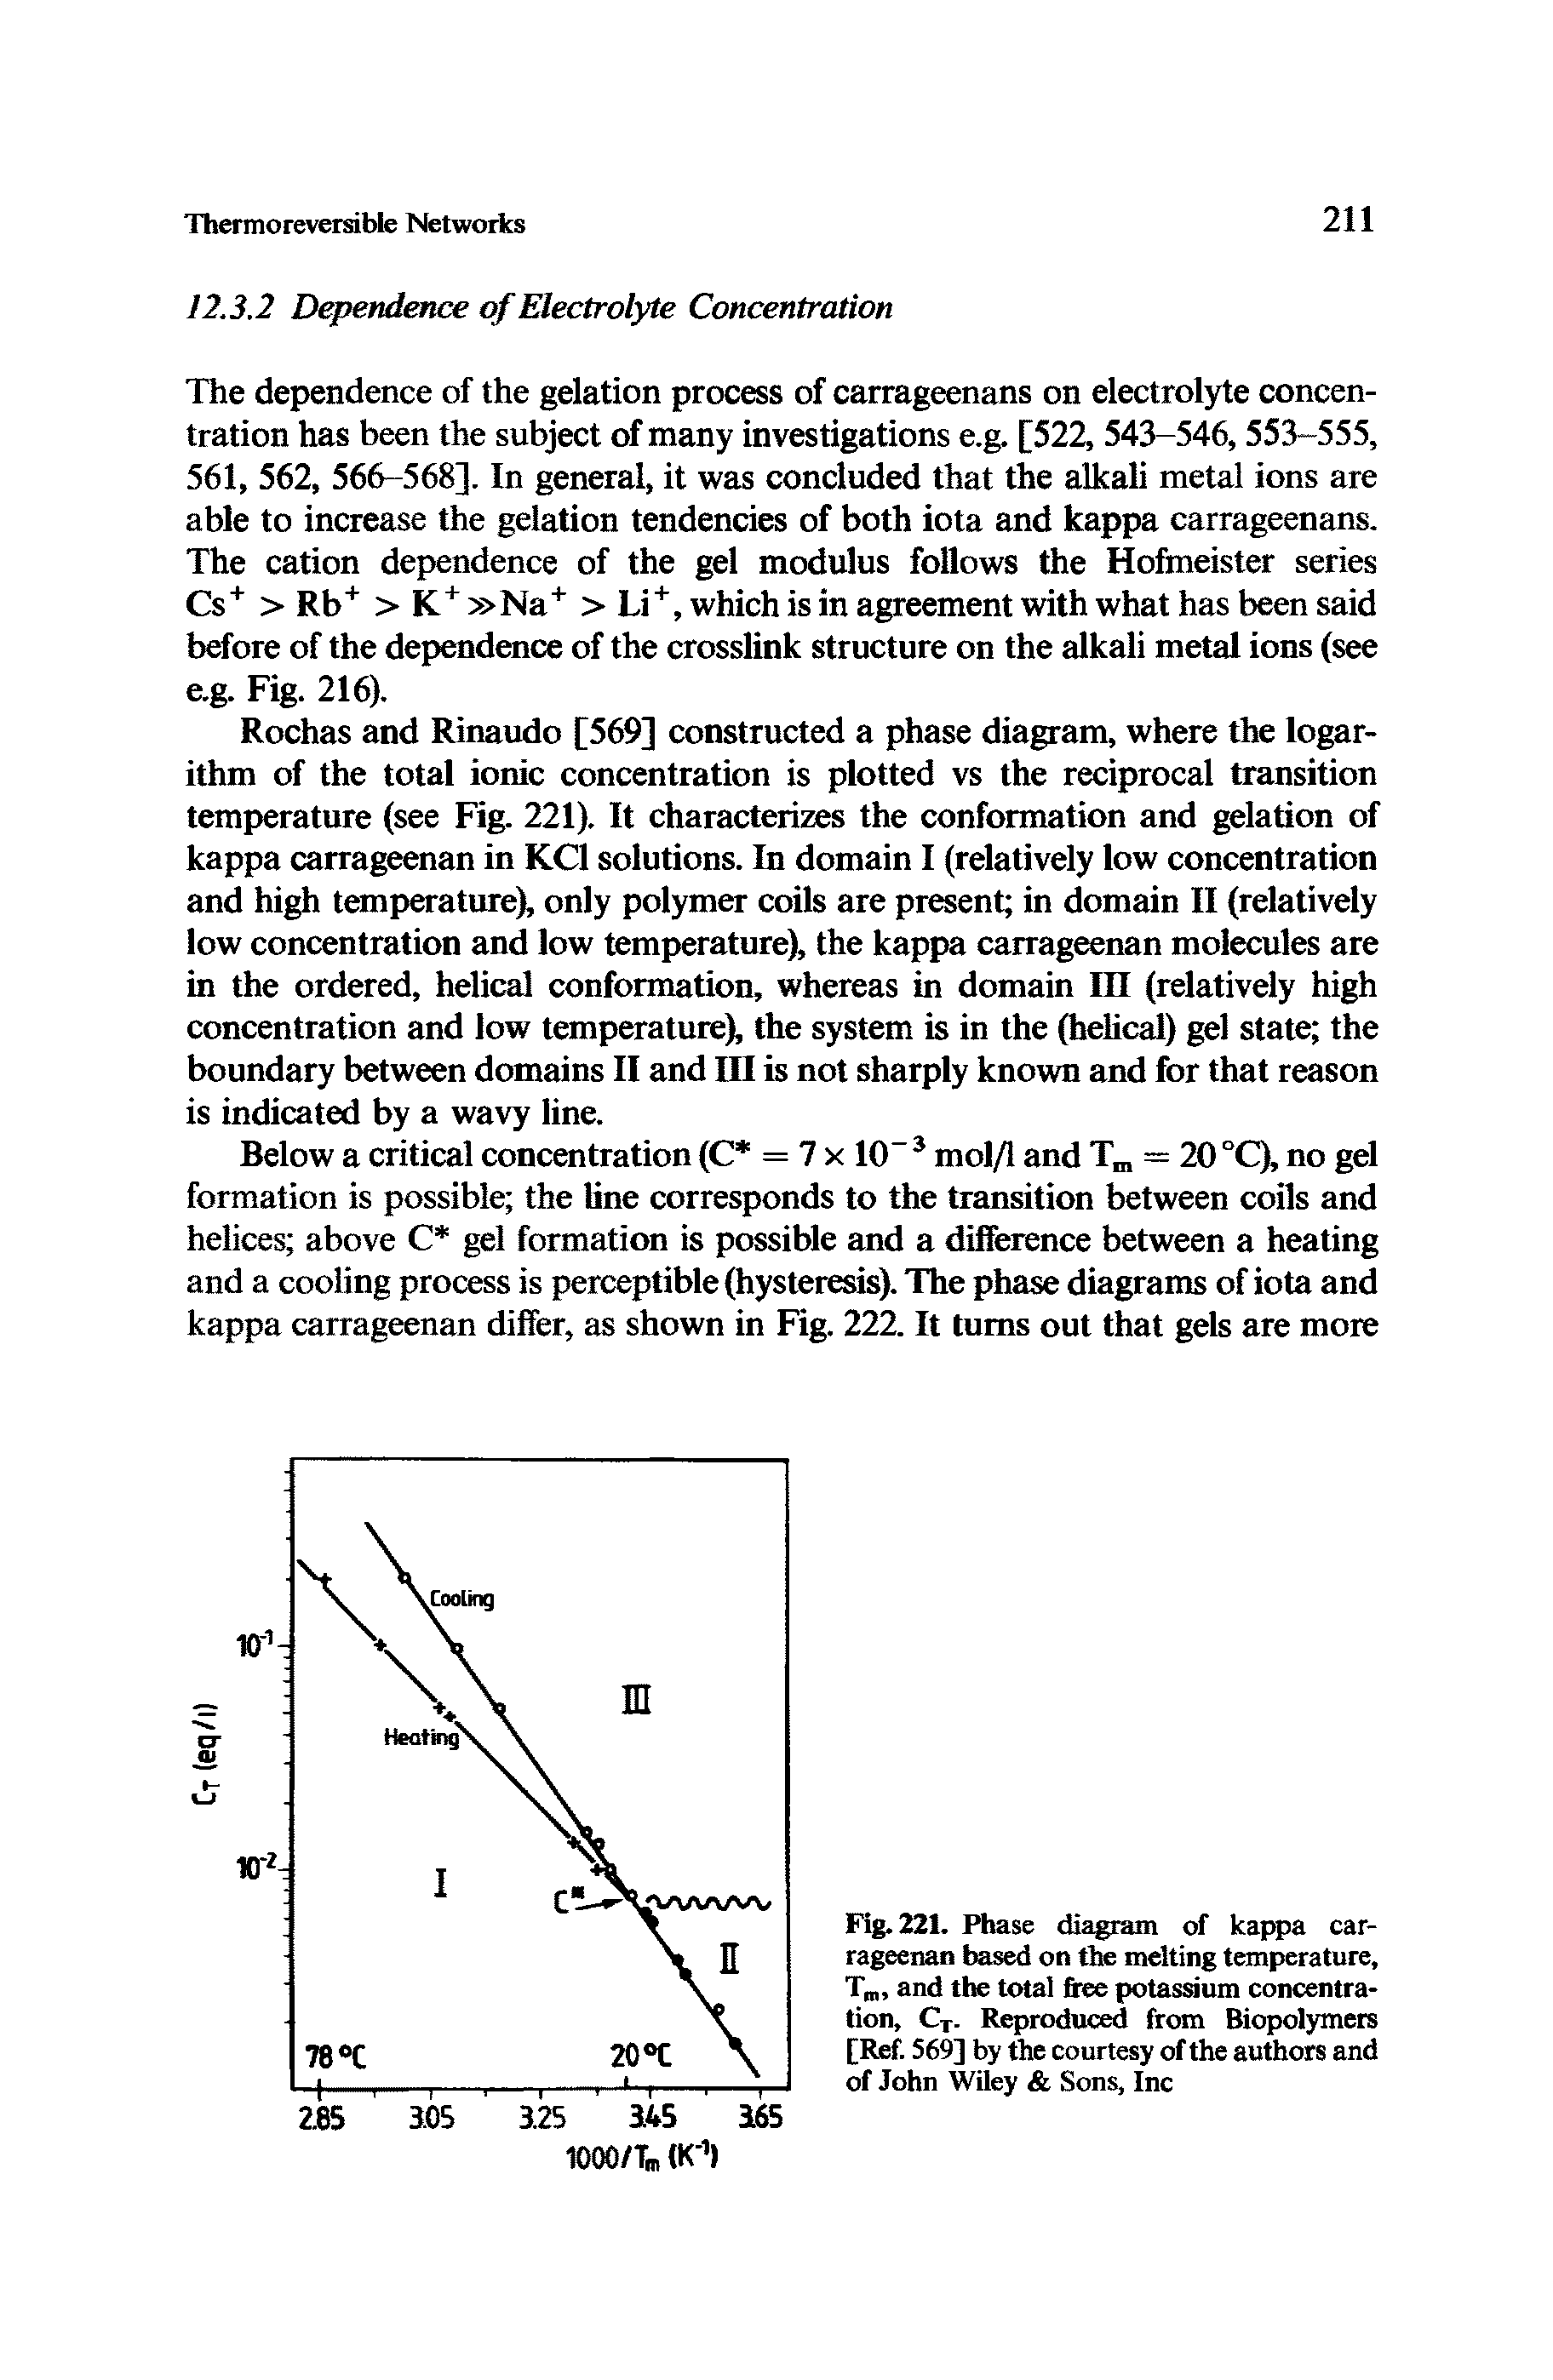 Fig. 221. Phase diagram of kappa carrageenan based on the melting temperature, T , and the total ftee potassium concentration, Cy. Reproduced from Biopolymers [Ref. 569] by the courtesy of the authors and of John Wiley Sons, Inc...